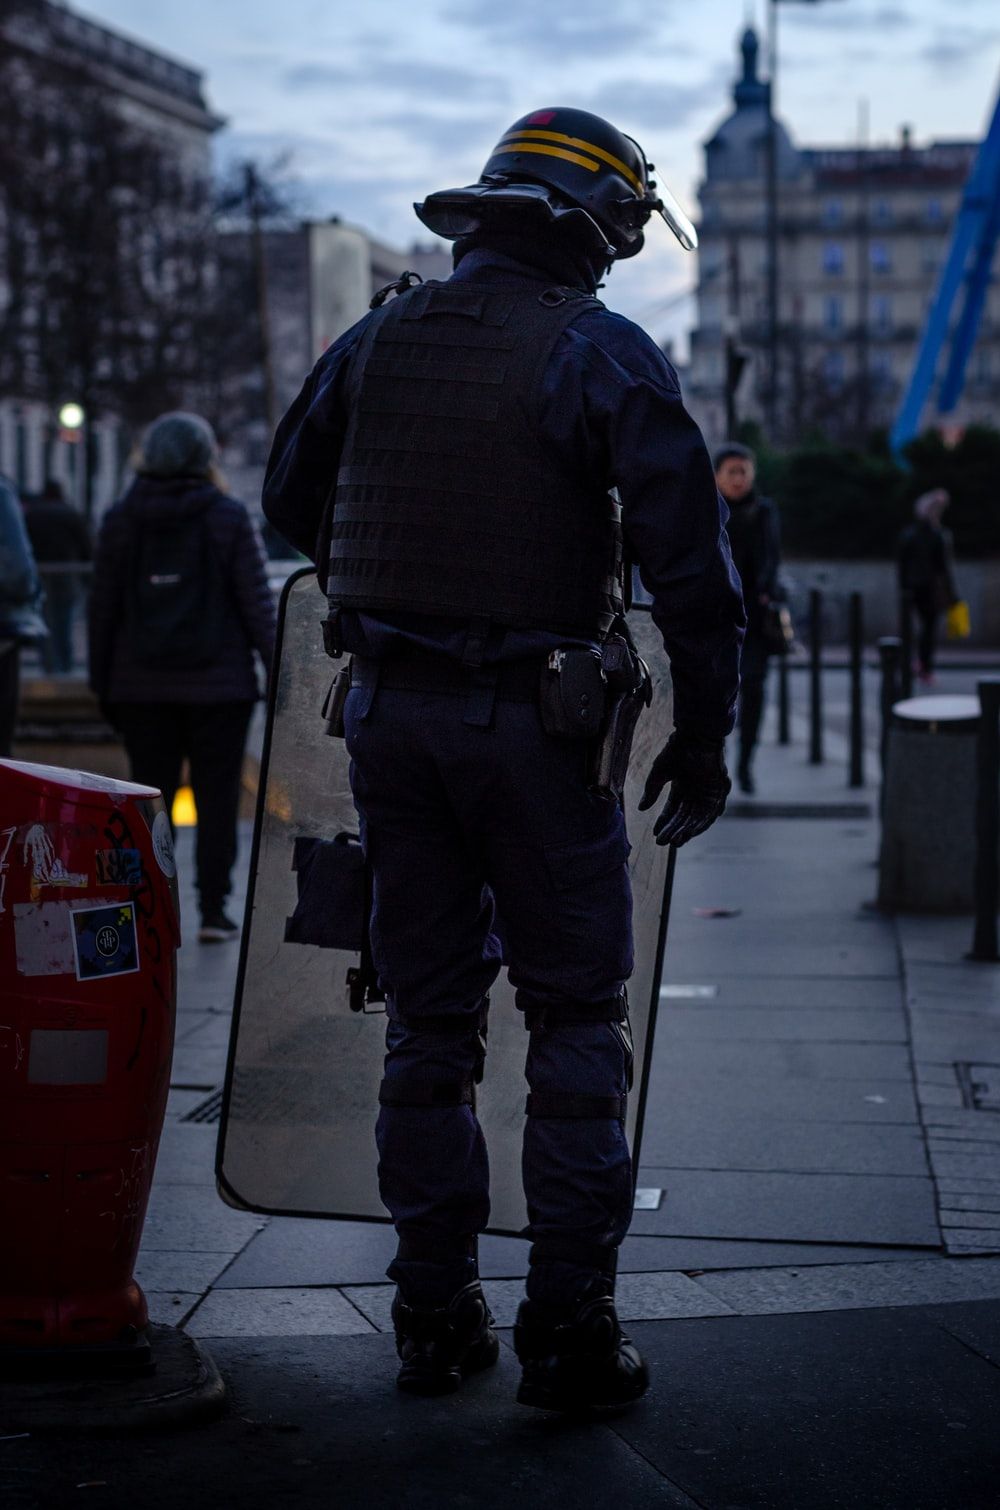 police officer standing and carrying riot shield photo